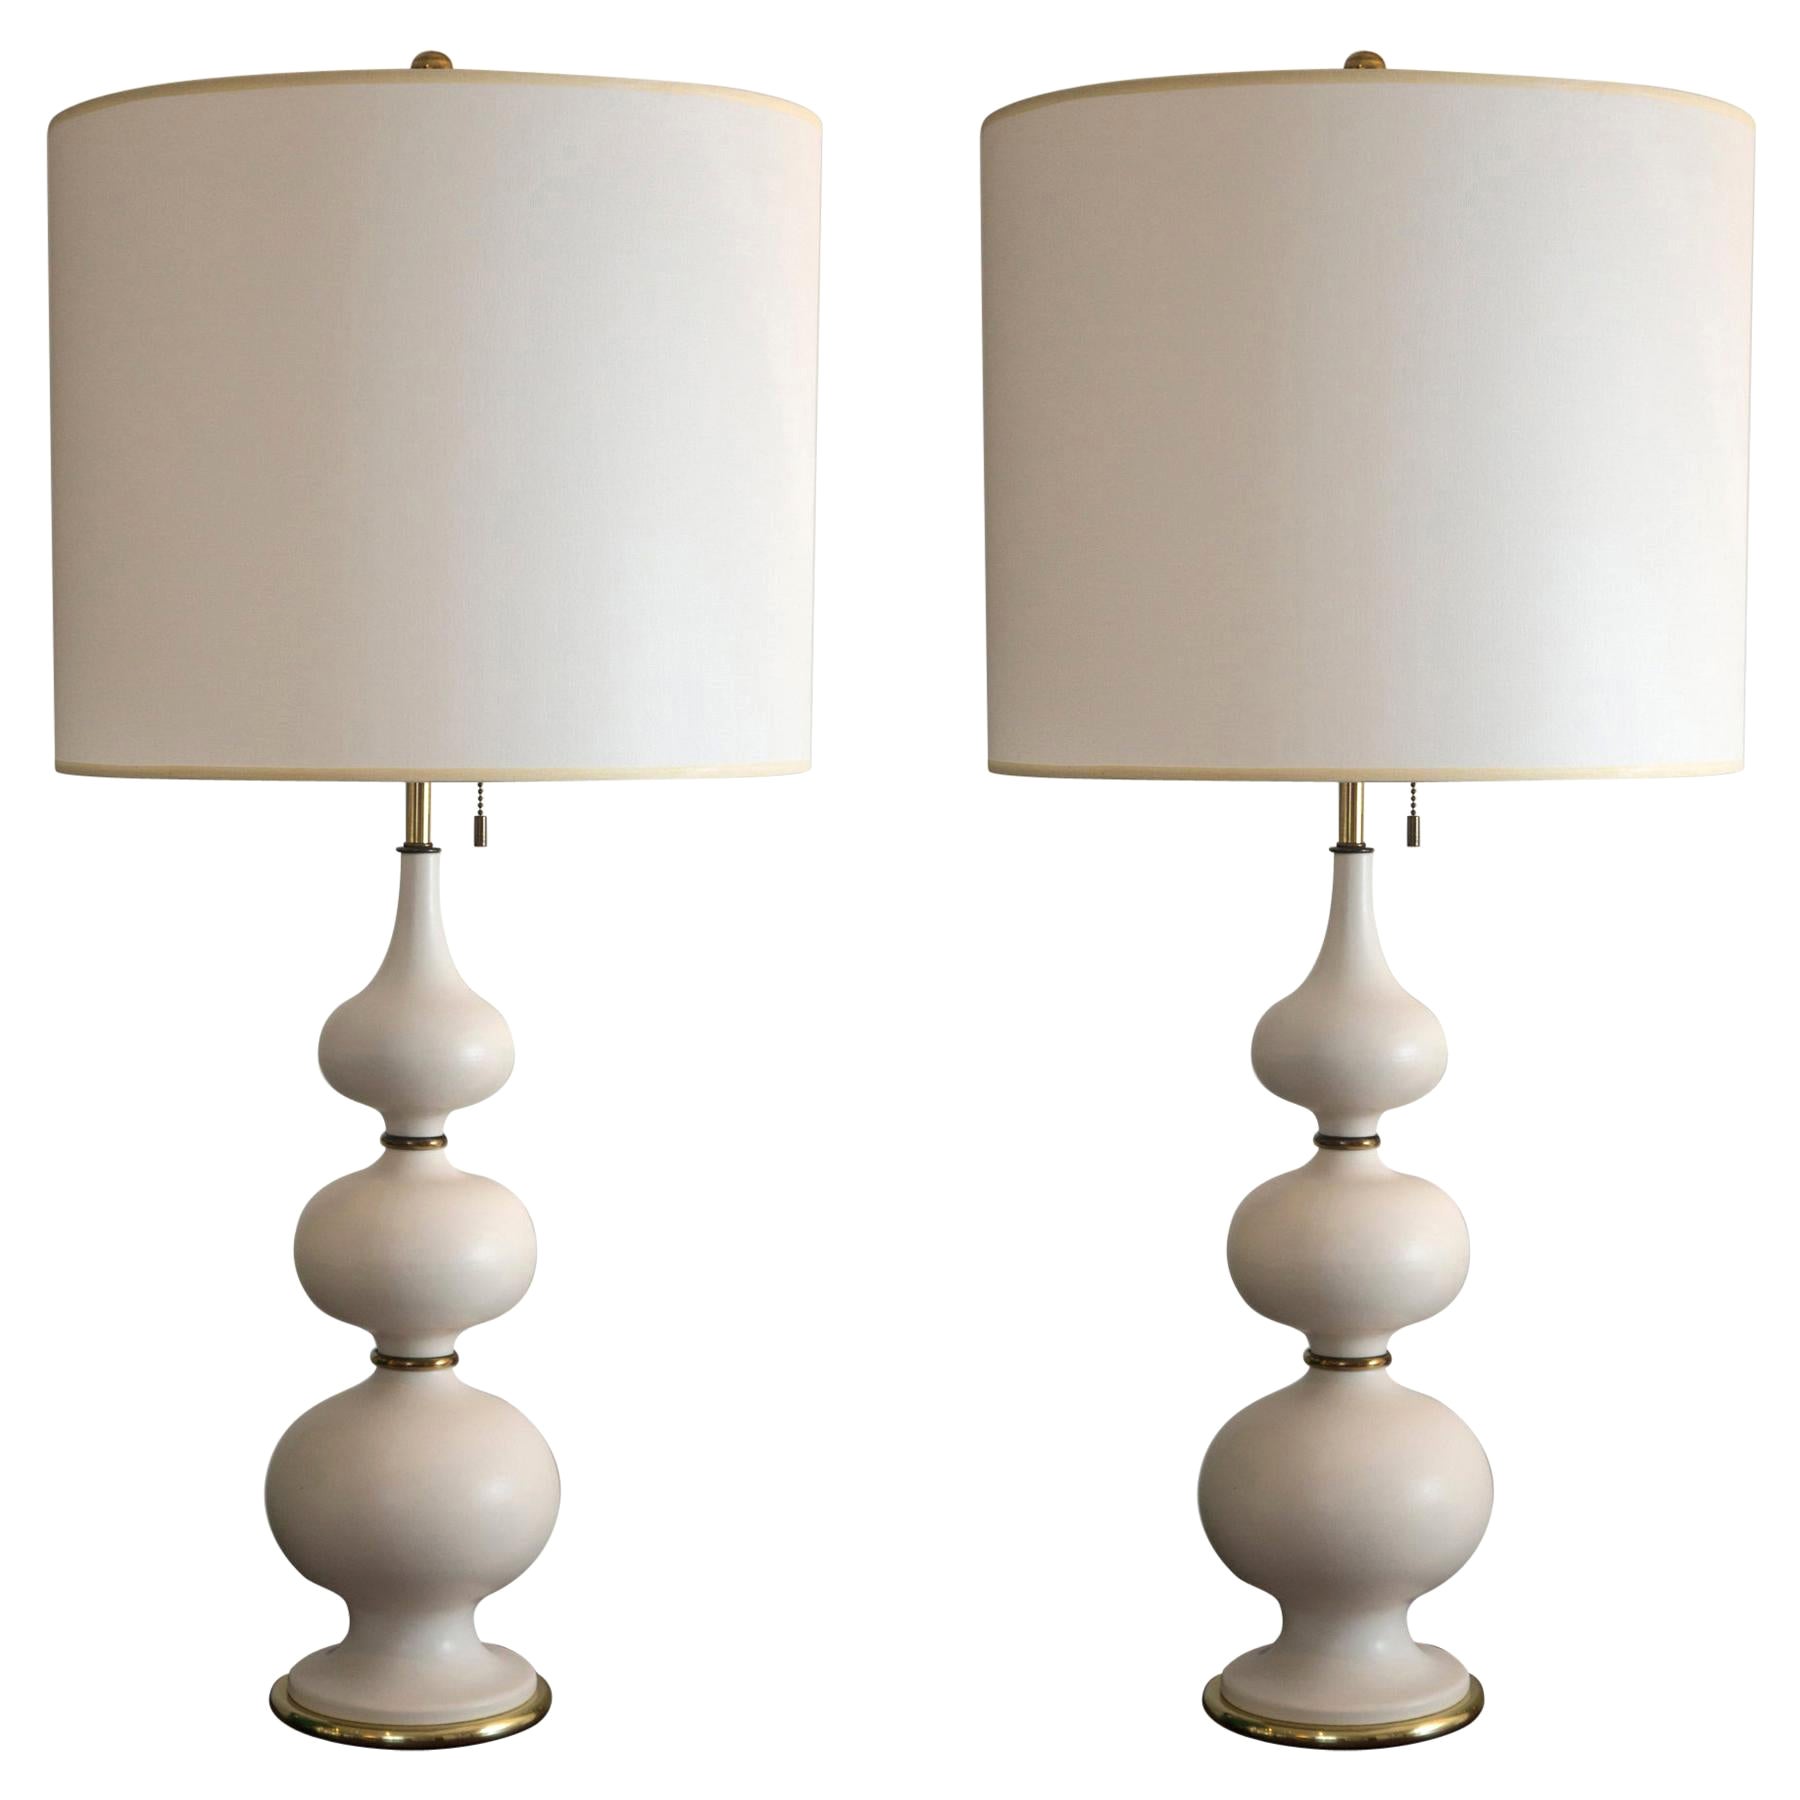 Pair of Tall Cream Lamps by Gerald Thurston